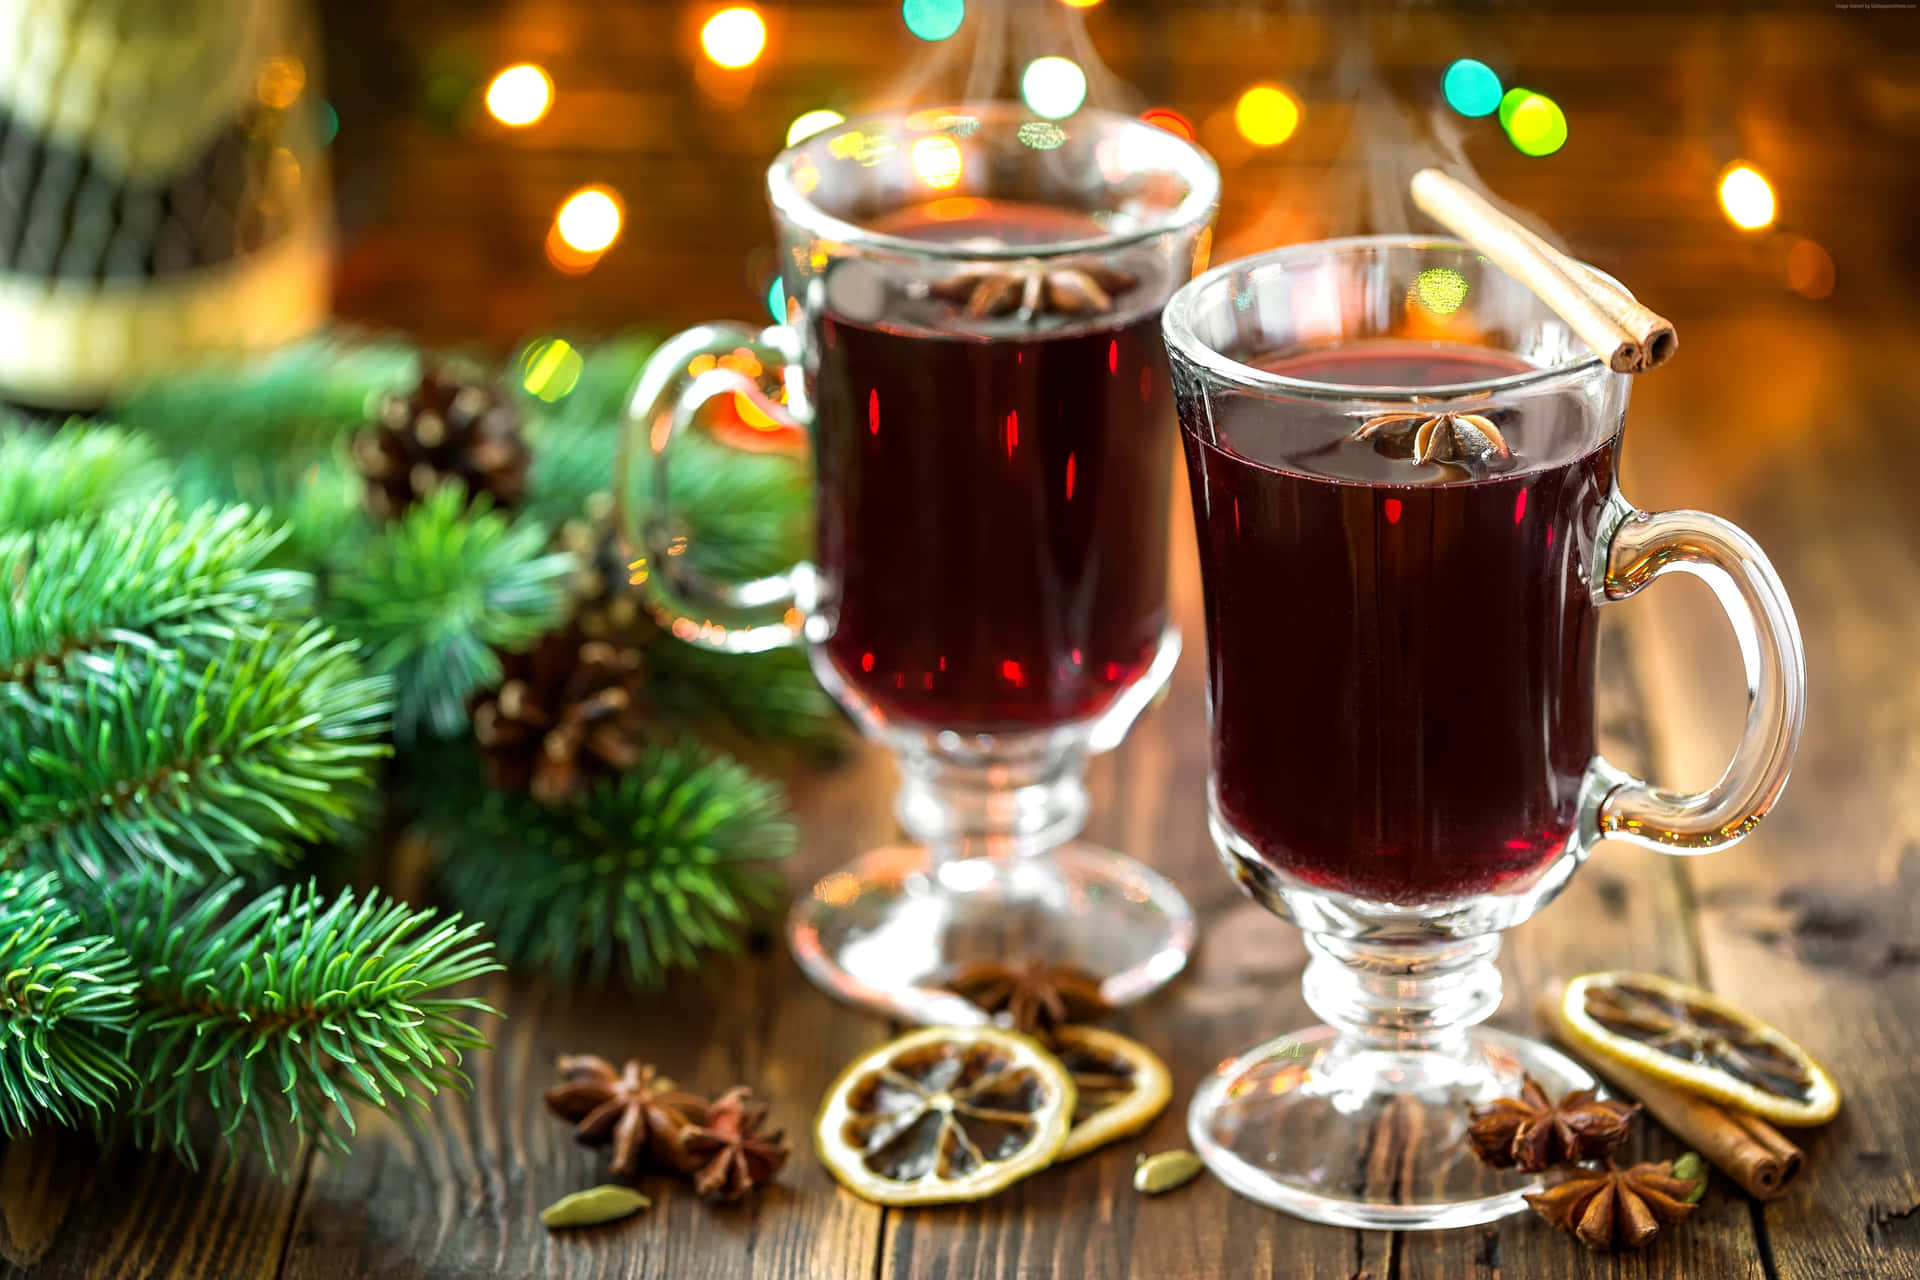 A steaming cup of aromatic mulled wine garnished with fresh fruits and spices against a cozy, festive backdrop. Wallpaper